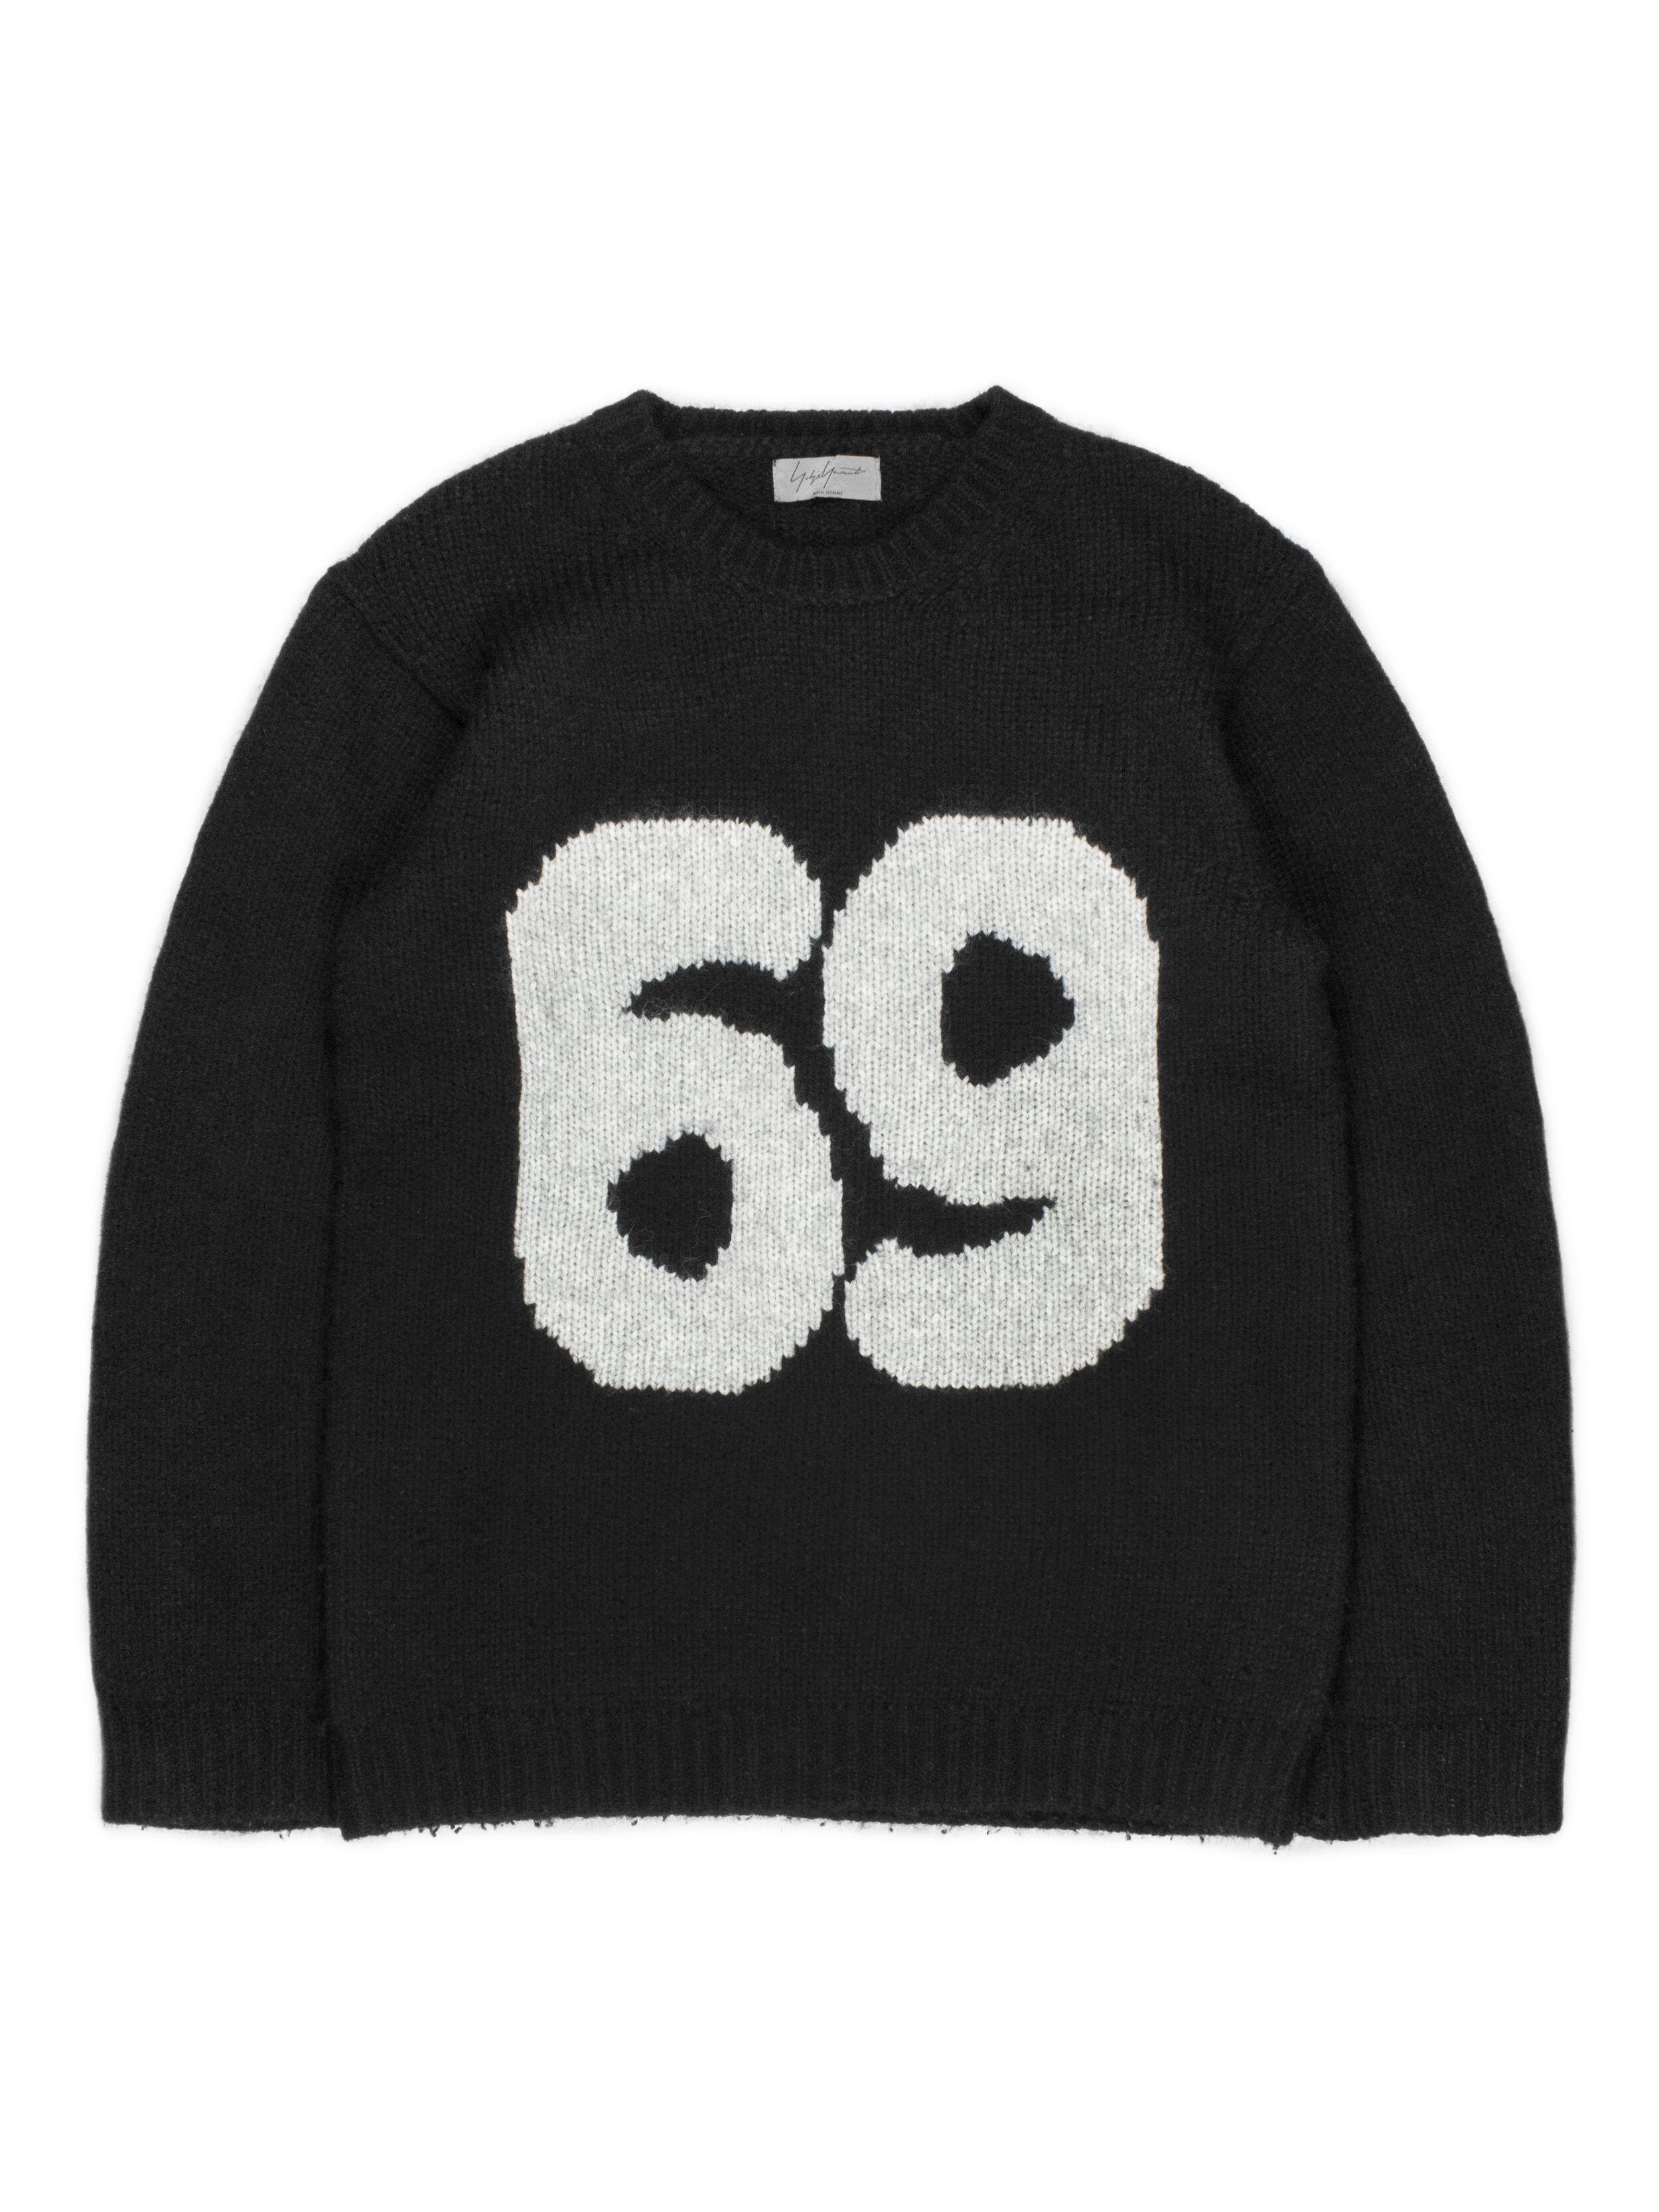 Yohji Yamamoto Pour Homme AW2012 69 Sweater — Middleman Store